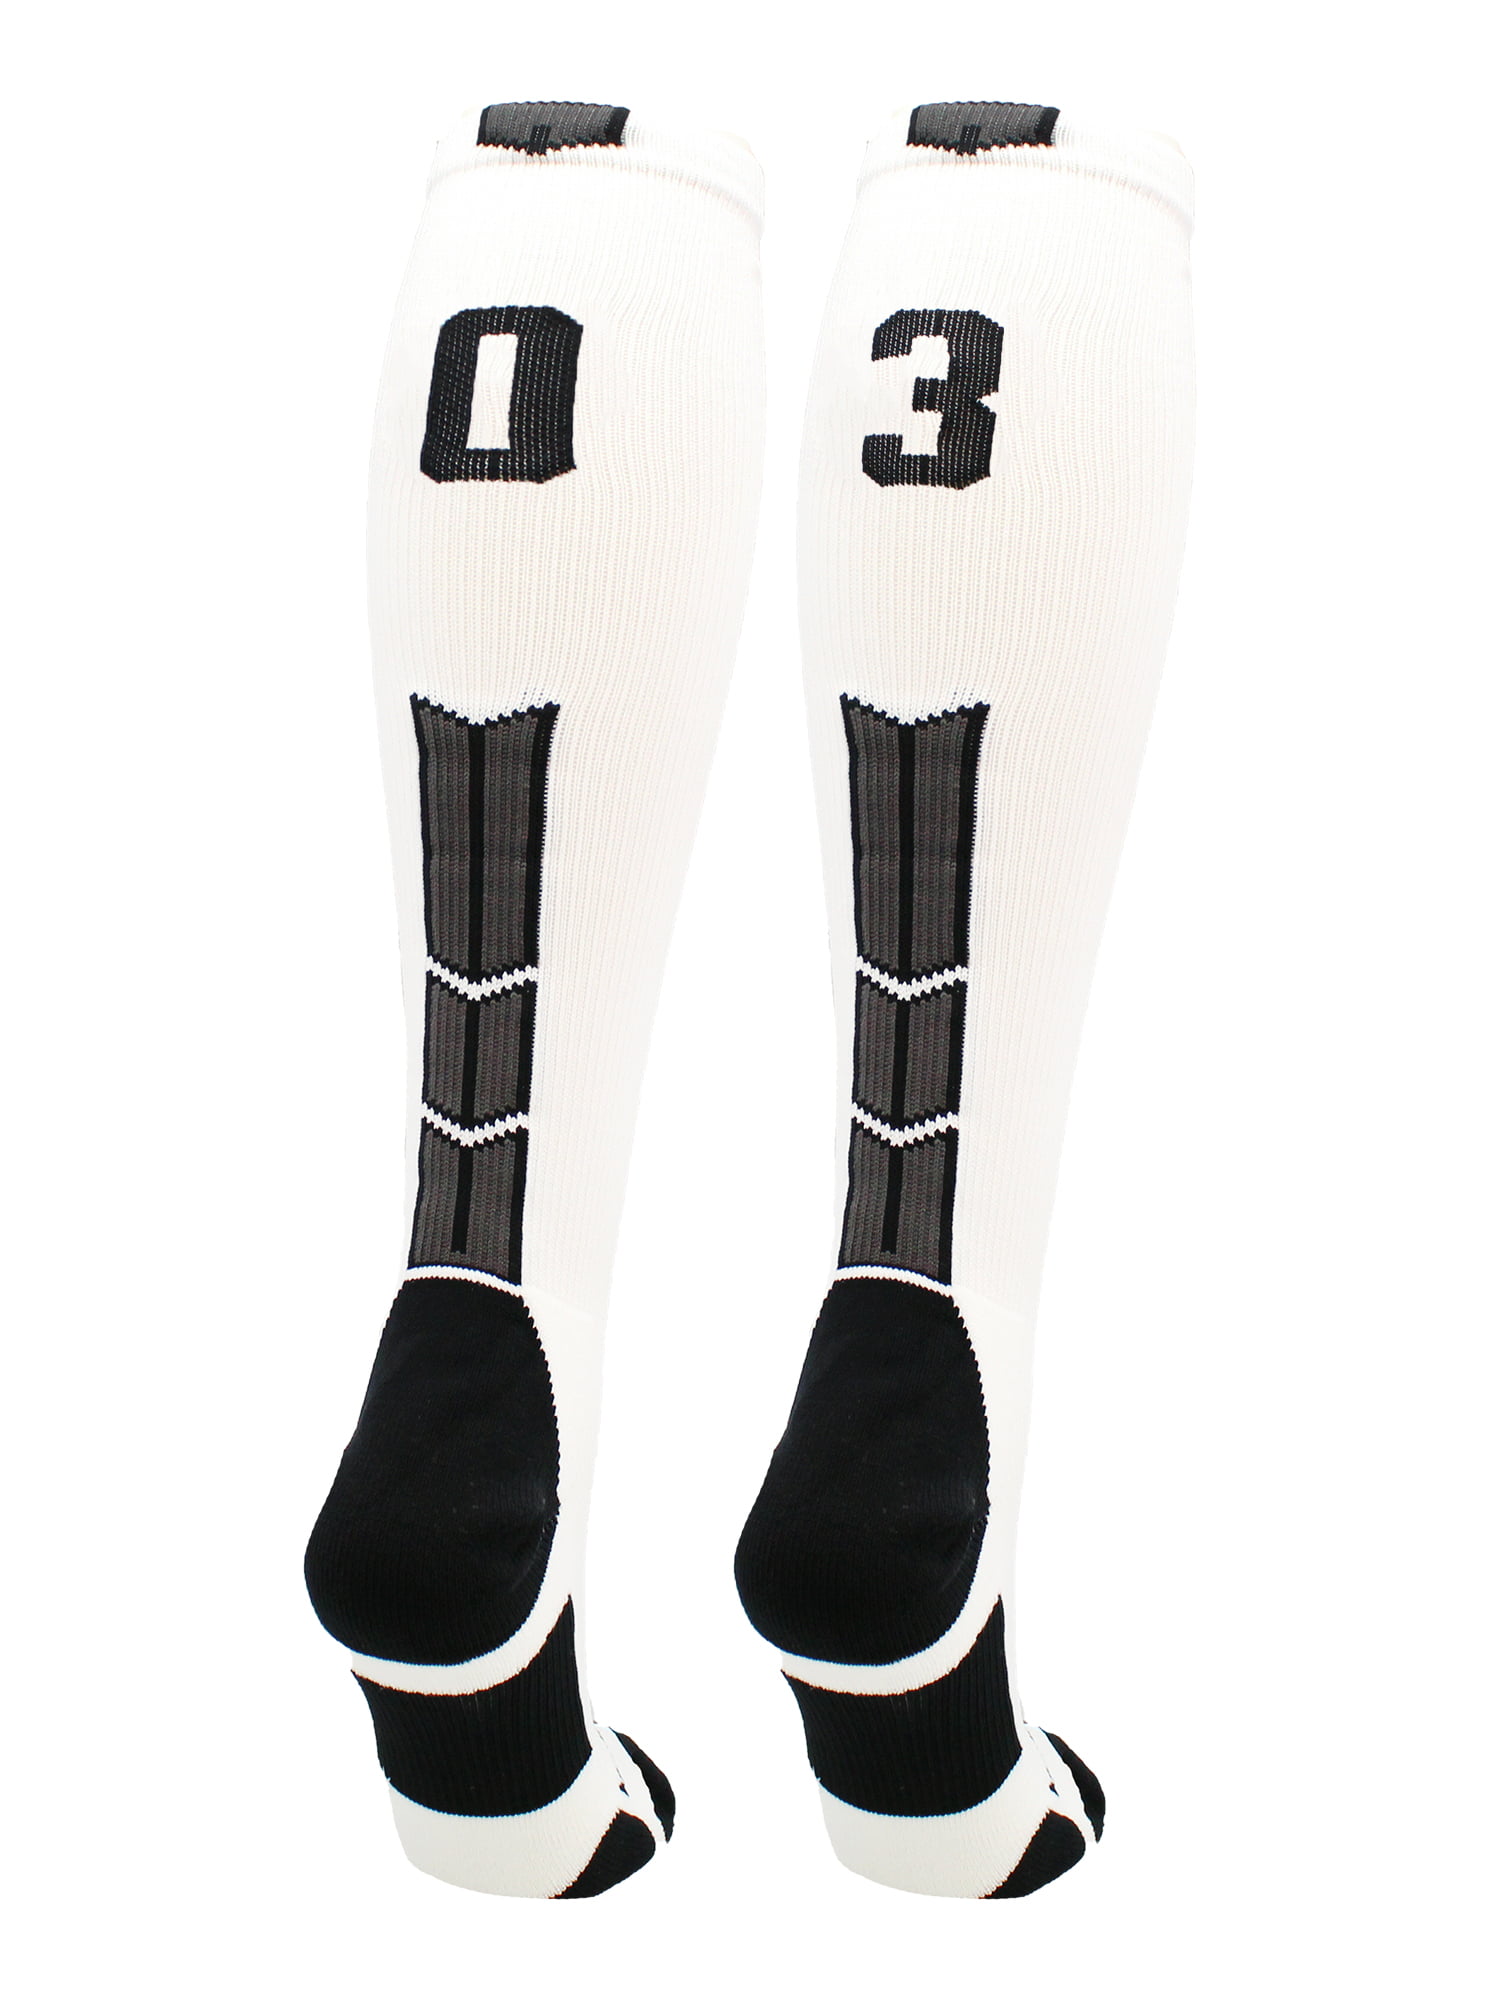 Player Id Jersey Number Socks Over the Calf Length Black and White